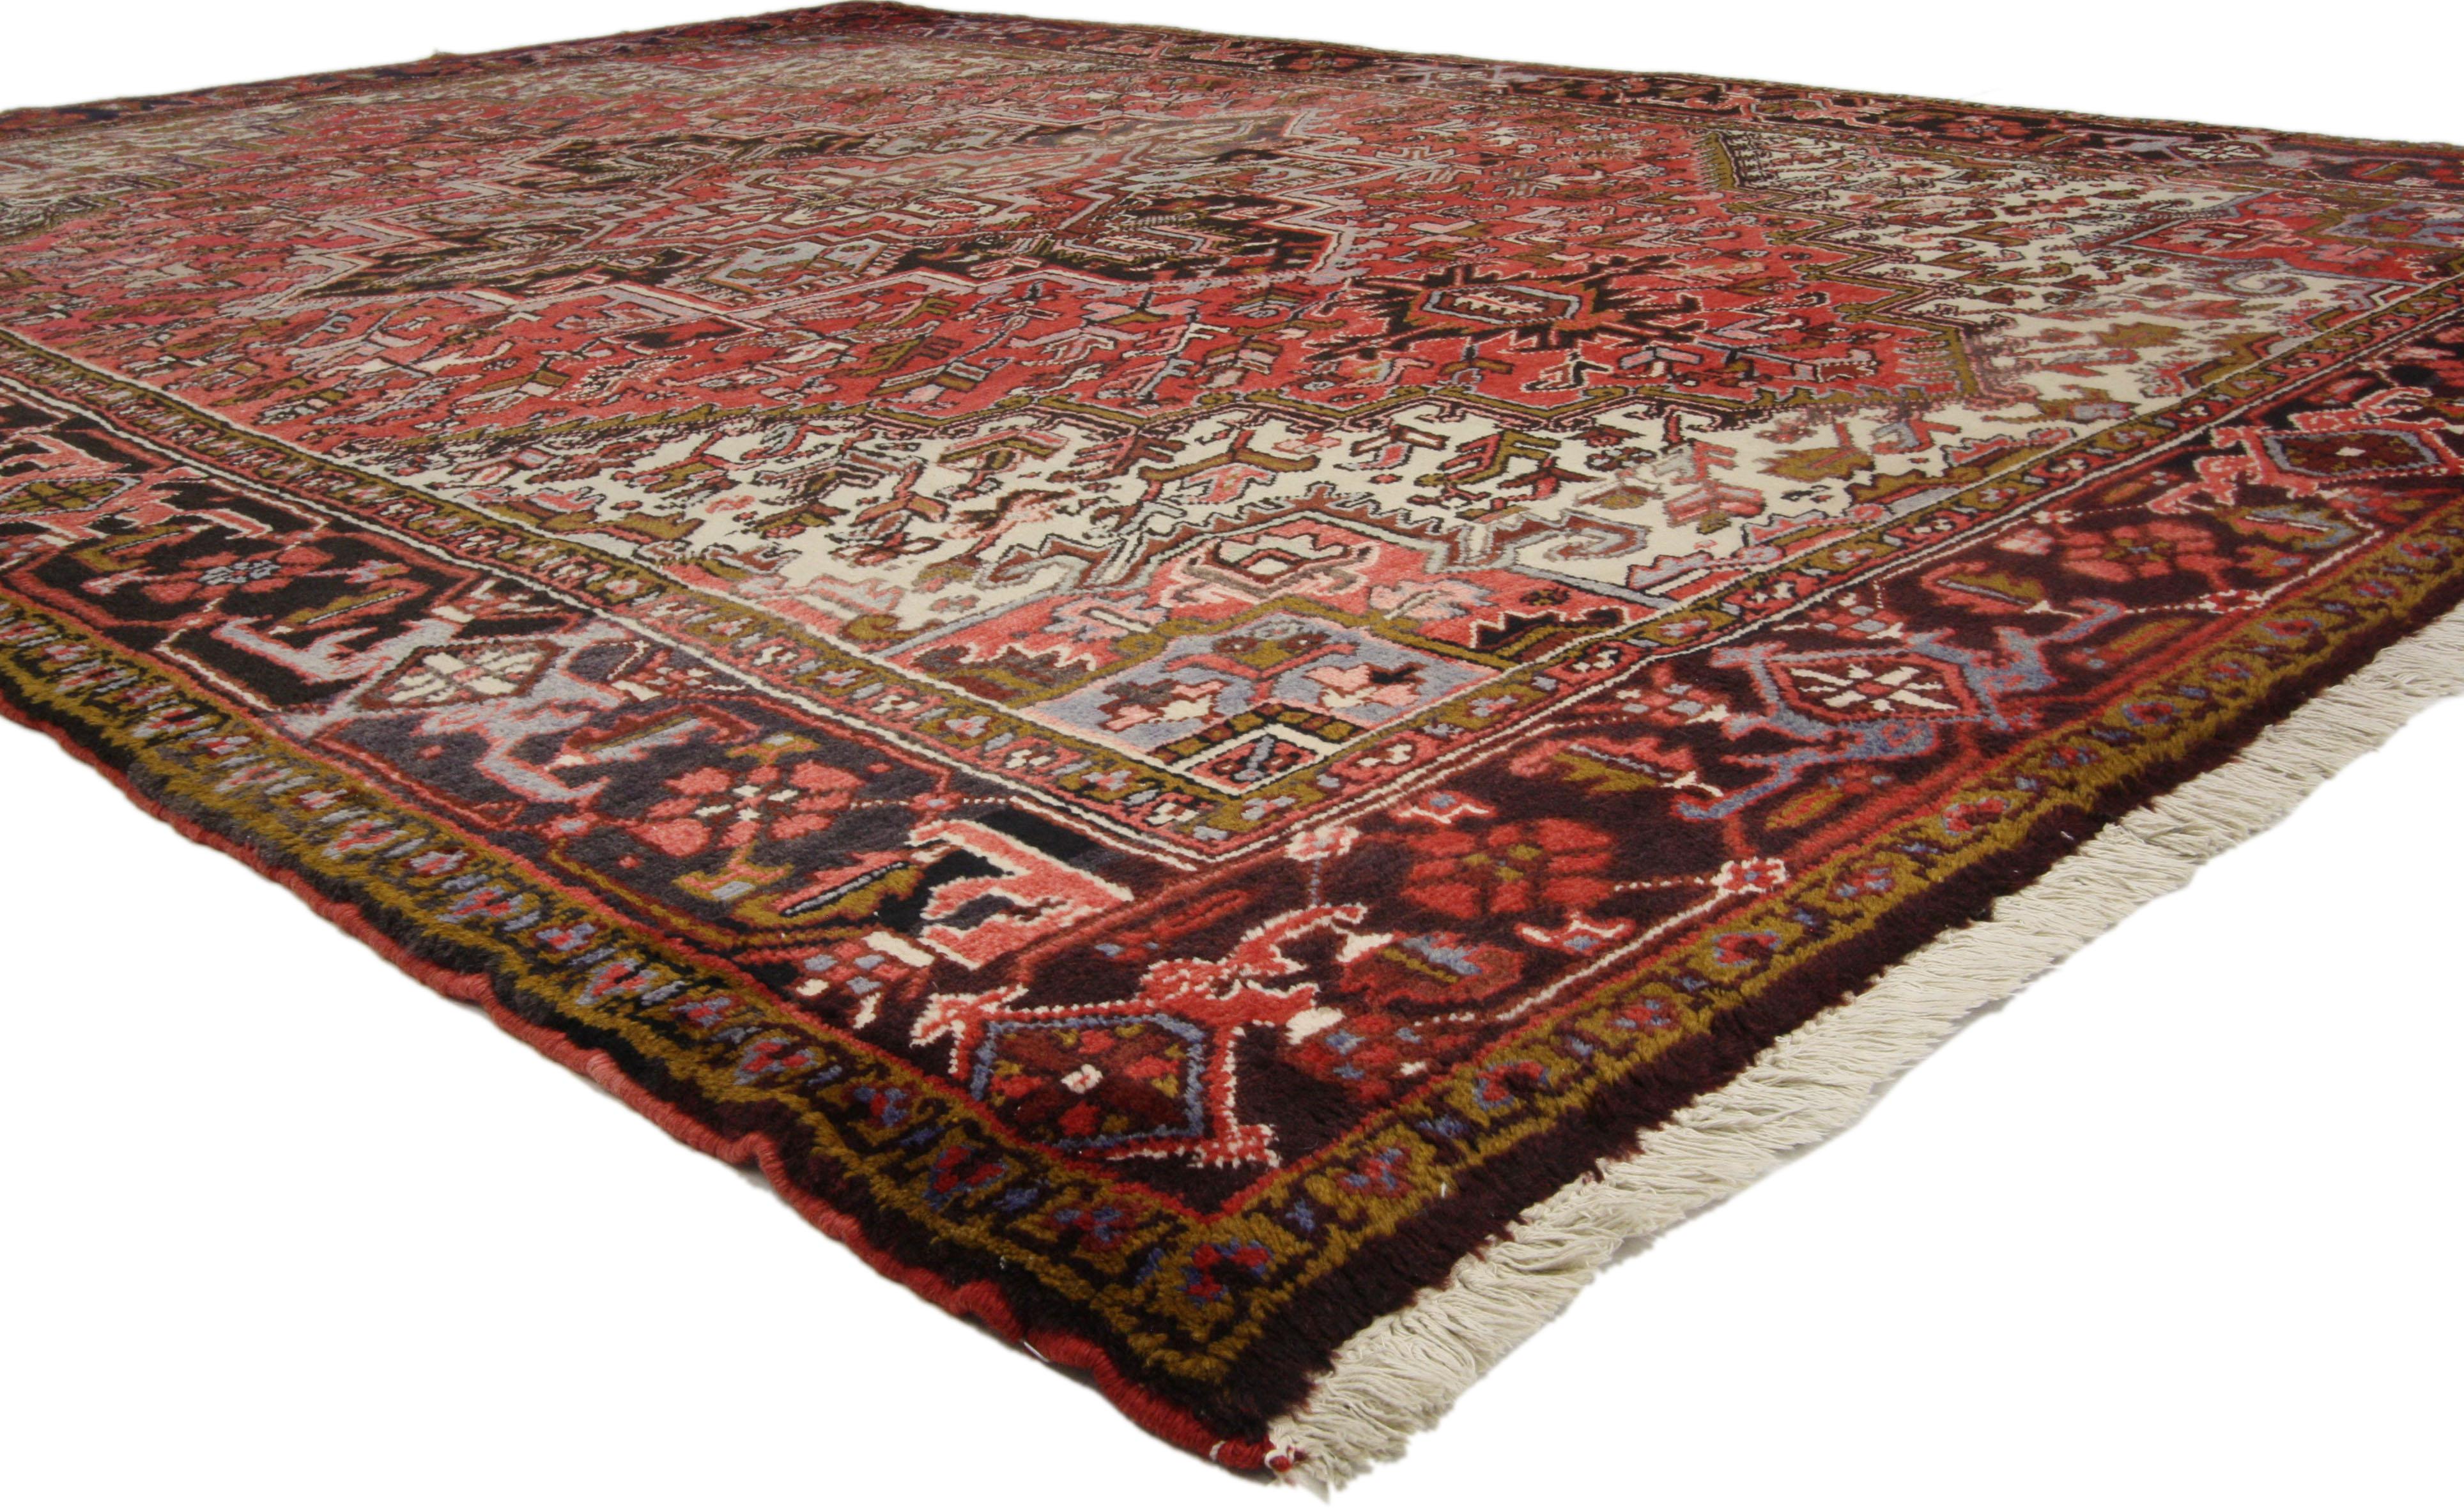 Impeccably woven from hand-knotted wool, this vintage Persian Heriz rug showcases Mid-Century Modern style and a beautiful tribal design highlighting the classical elements of Persian culture. This vintage Heriz rug has many layers that perform well